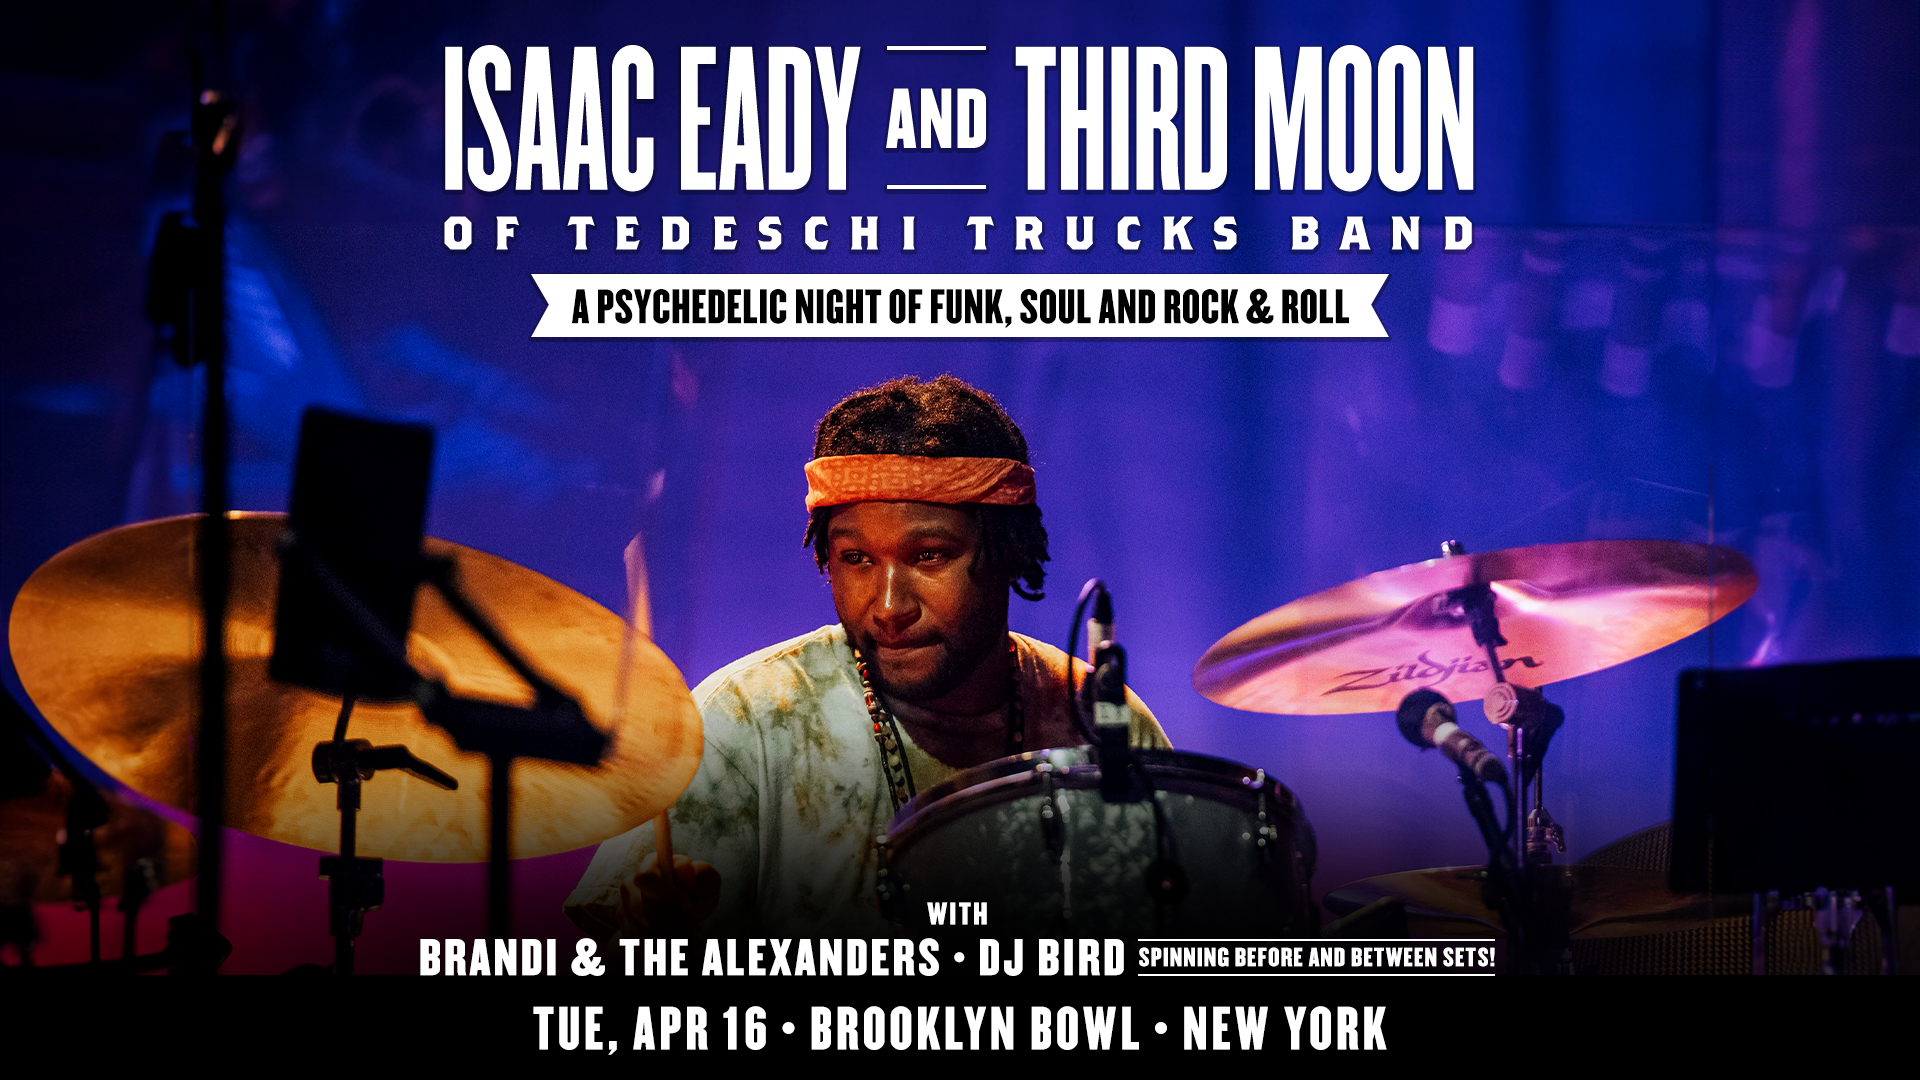 More Info for Isaac Eady and Third Moon (of Tedeschi Trucks Band)